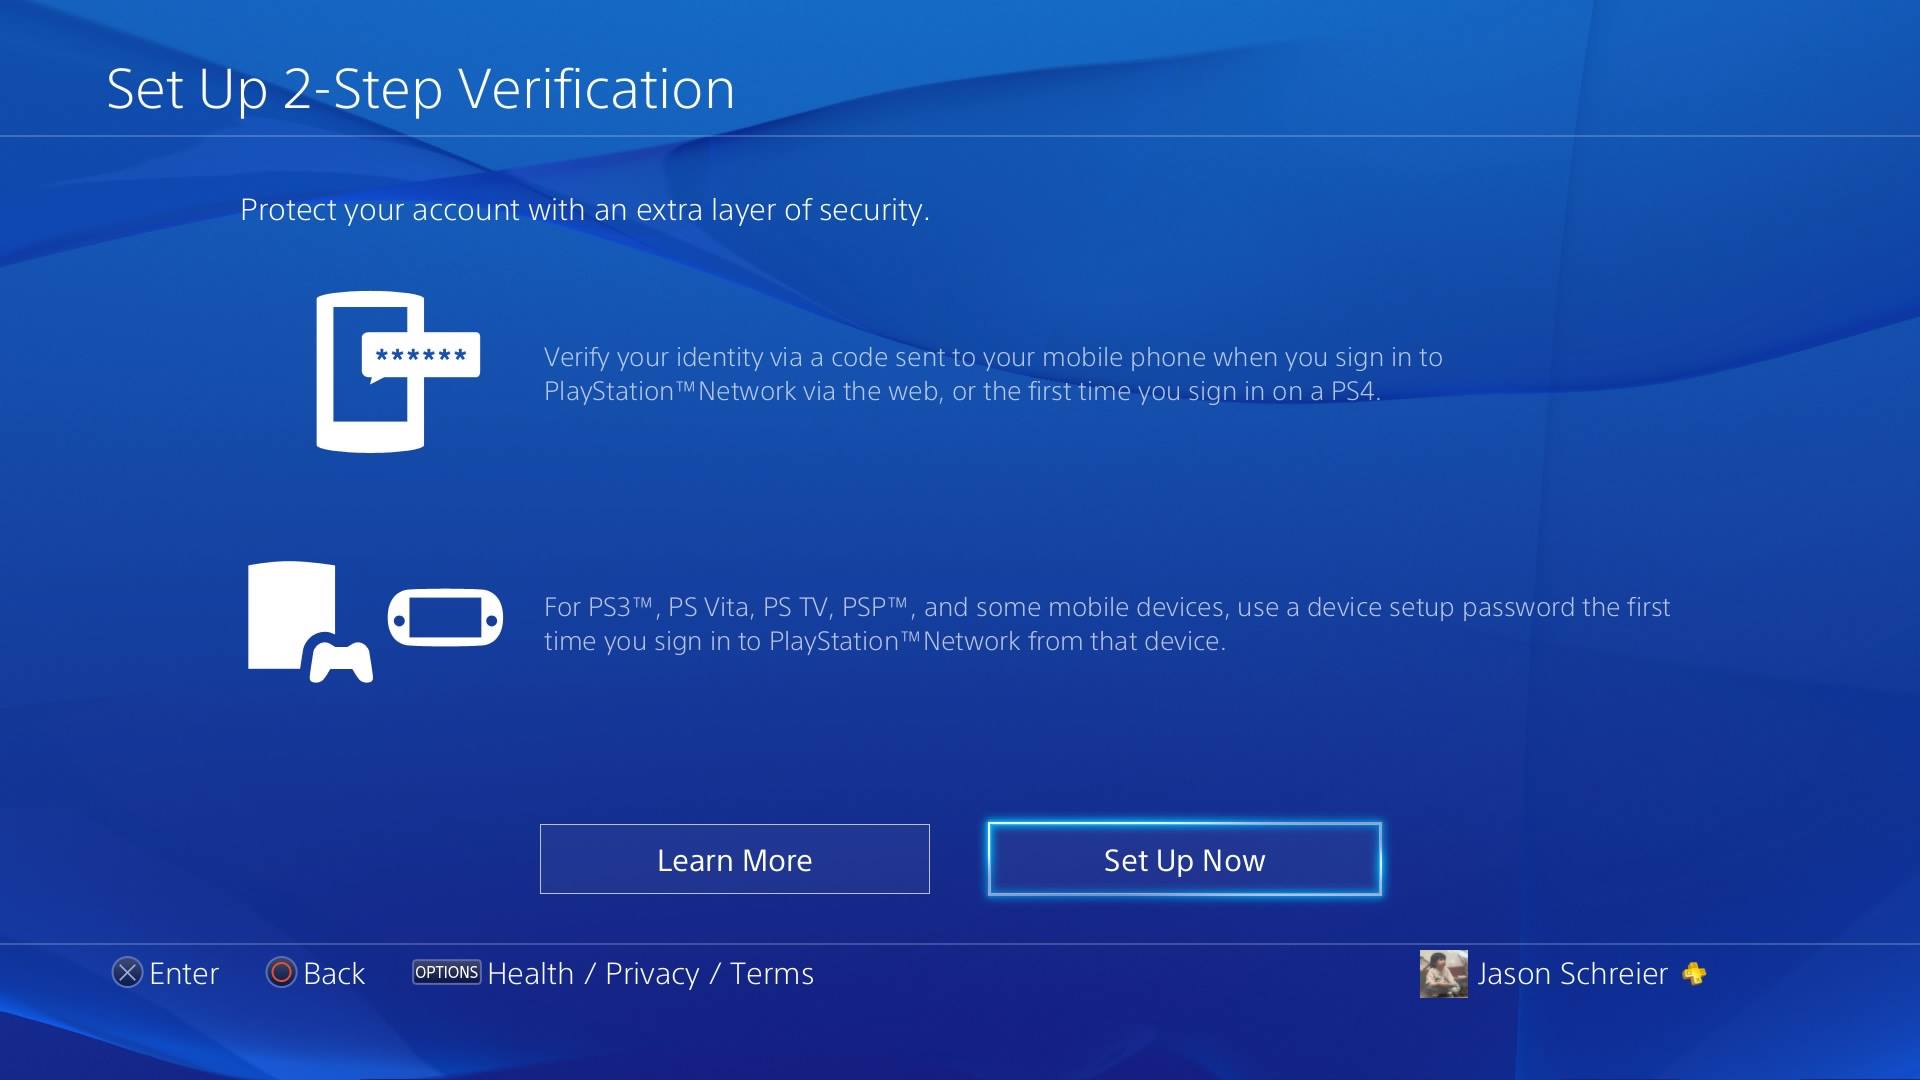 ps3 - help for login with new update for device id passwords